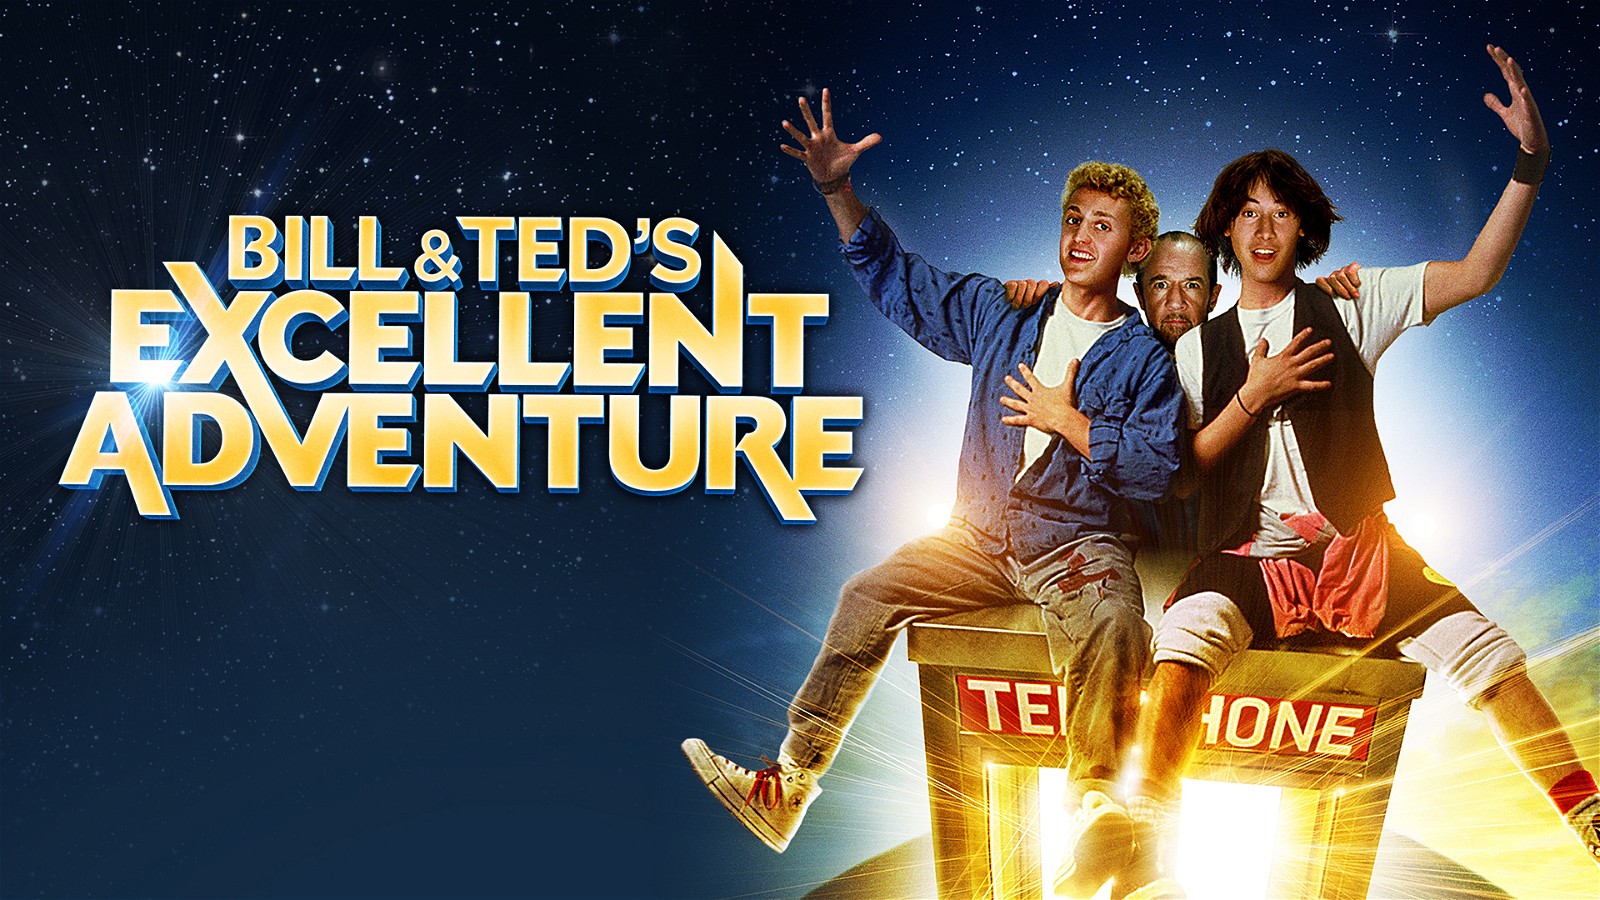 Reeves starred with Alex Winter in Bill & Ted's Excellent Adventure